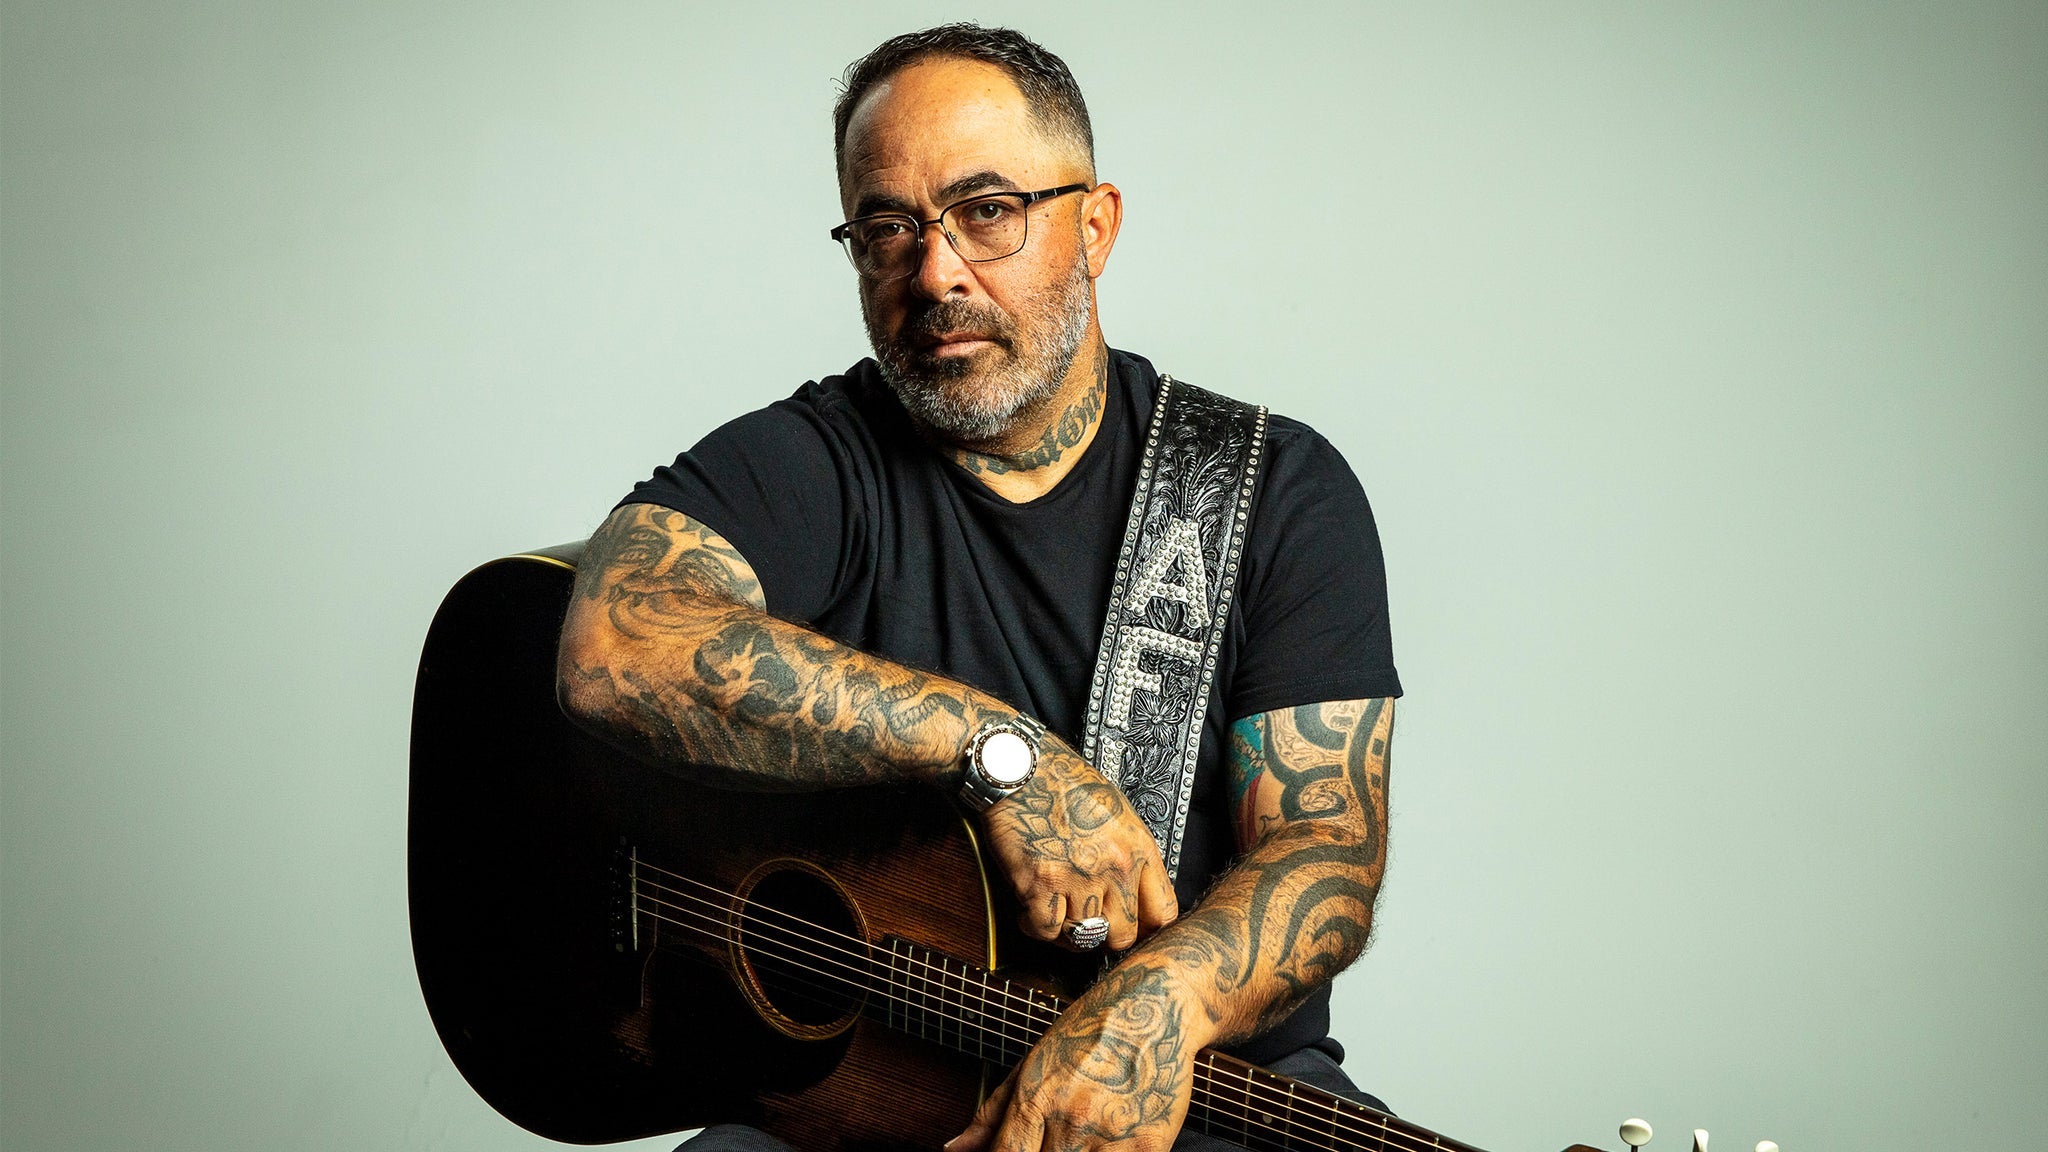 Aaron Lewis at First Interstate Arena - Billings, MT 59101